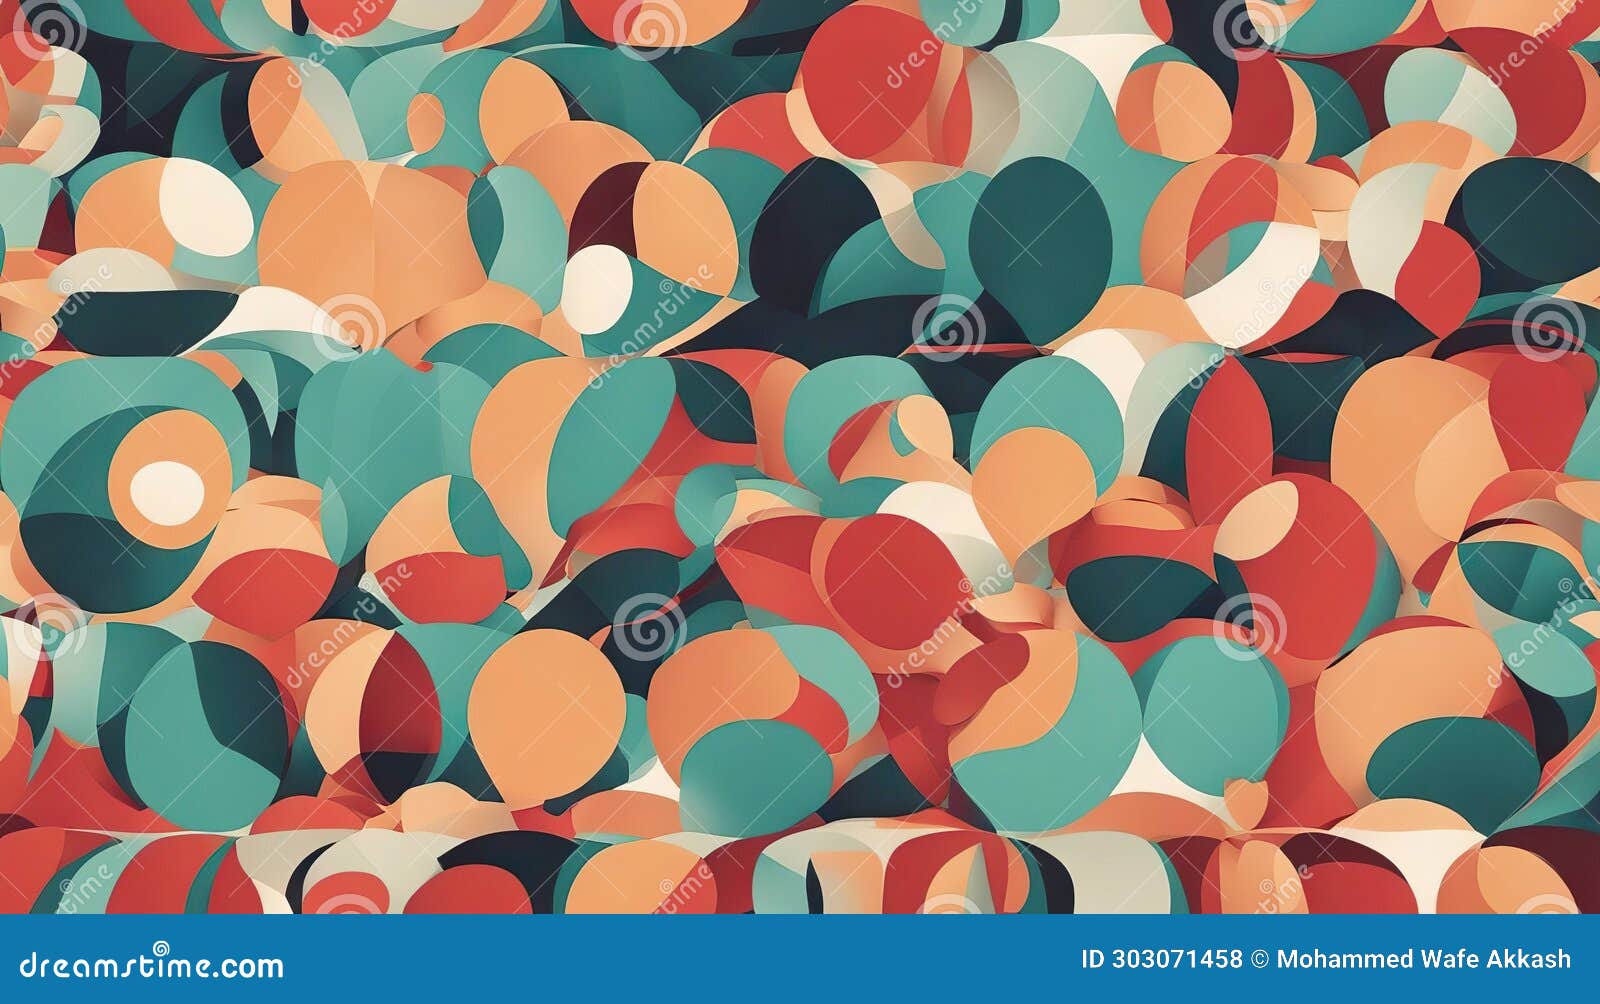 seamless retro abstract s background stock 1990 1999 pattern 1980 1989 backgrounds retro